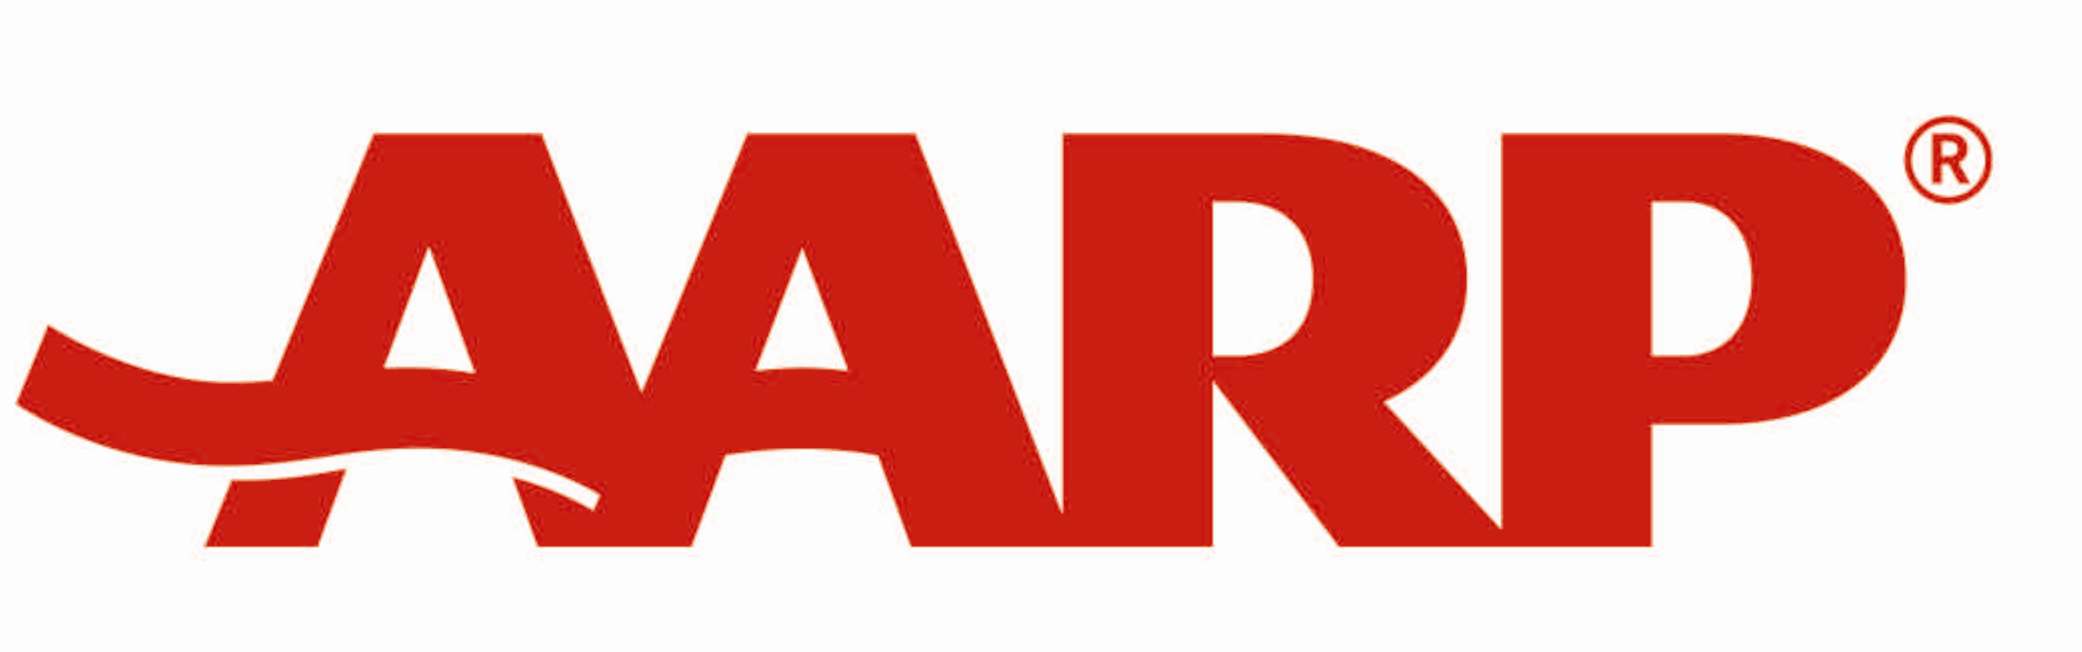 Aarp Small Business Insurance